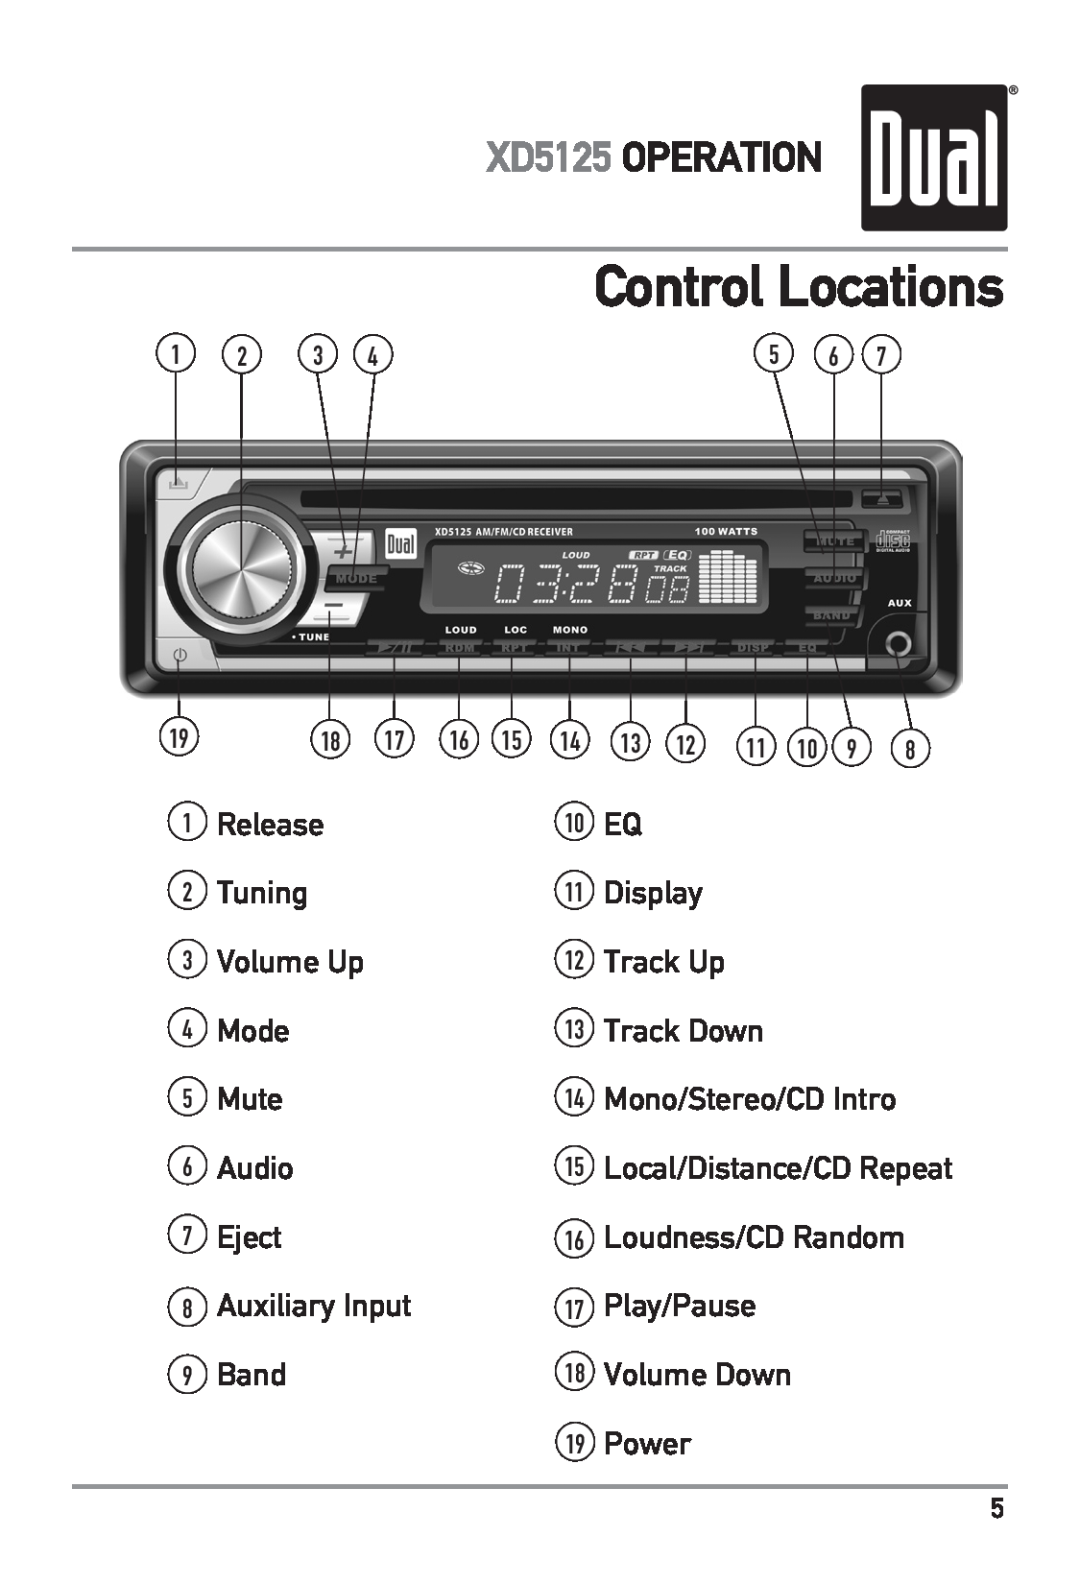 Dual owner manual Control Locations, XD5125 OPERATION 